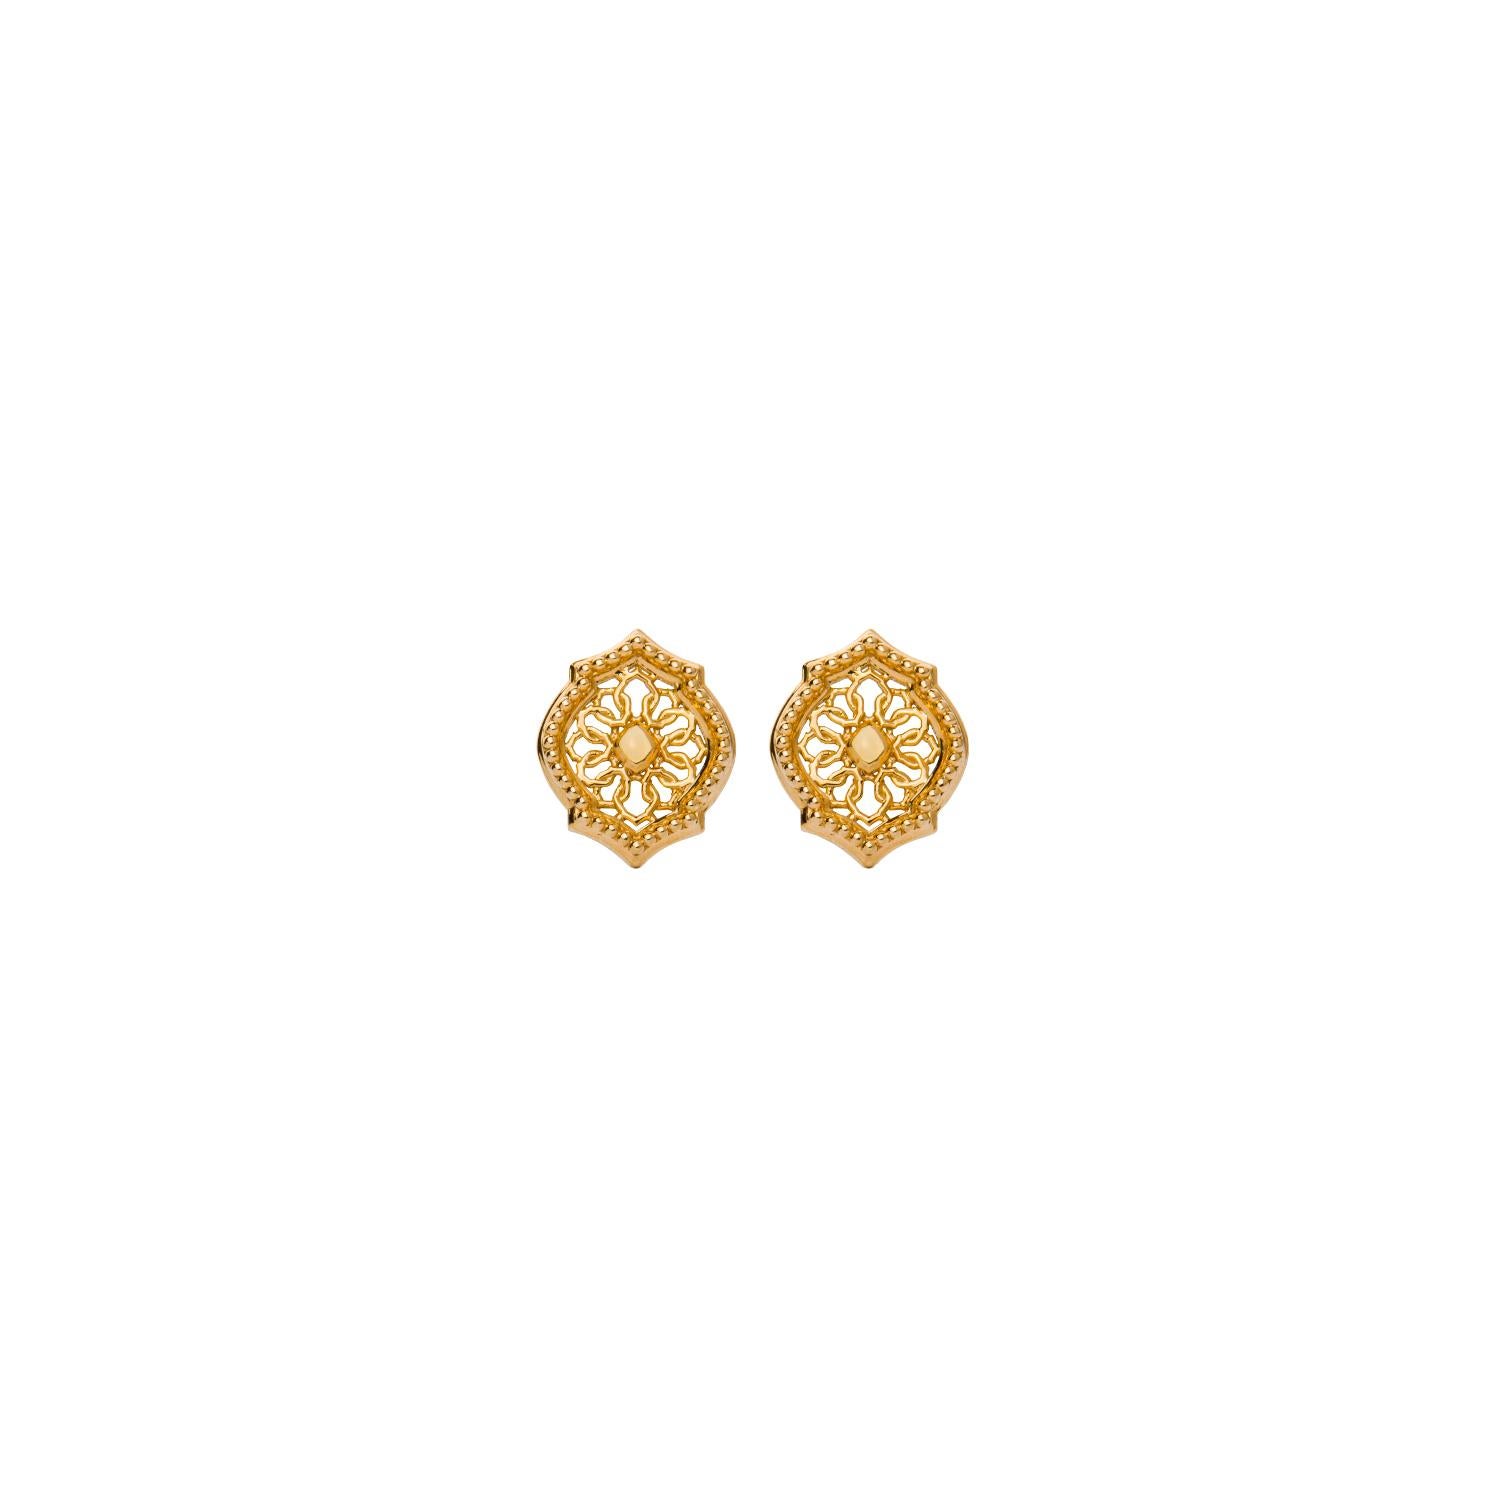 Part of the brand new 'Mauresque' collection by Natalie Barney, these earrings features a  Moorish inspired stud fitting for a classical yet unusual look. 

Made in 18 karat yellow gold.  Please request the video for an even closer view of these